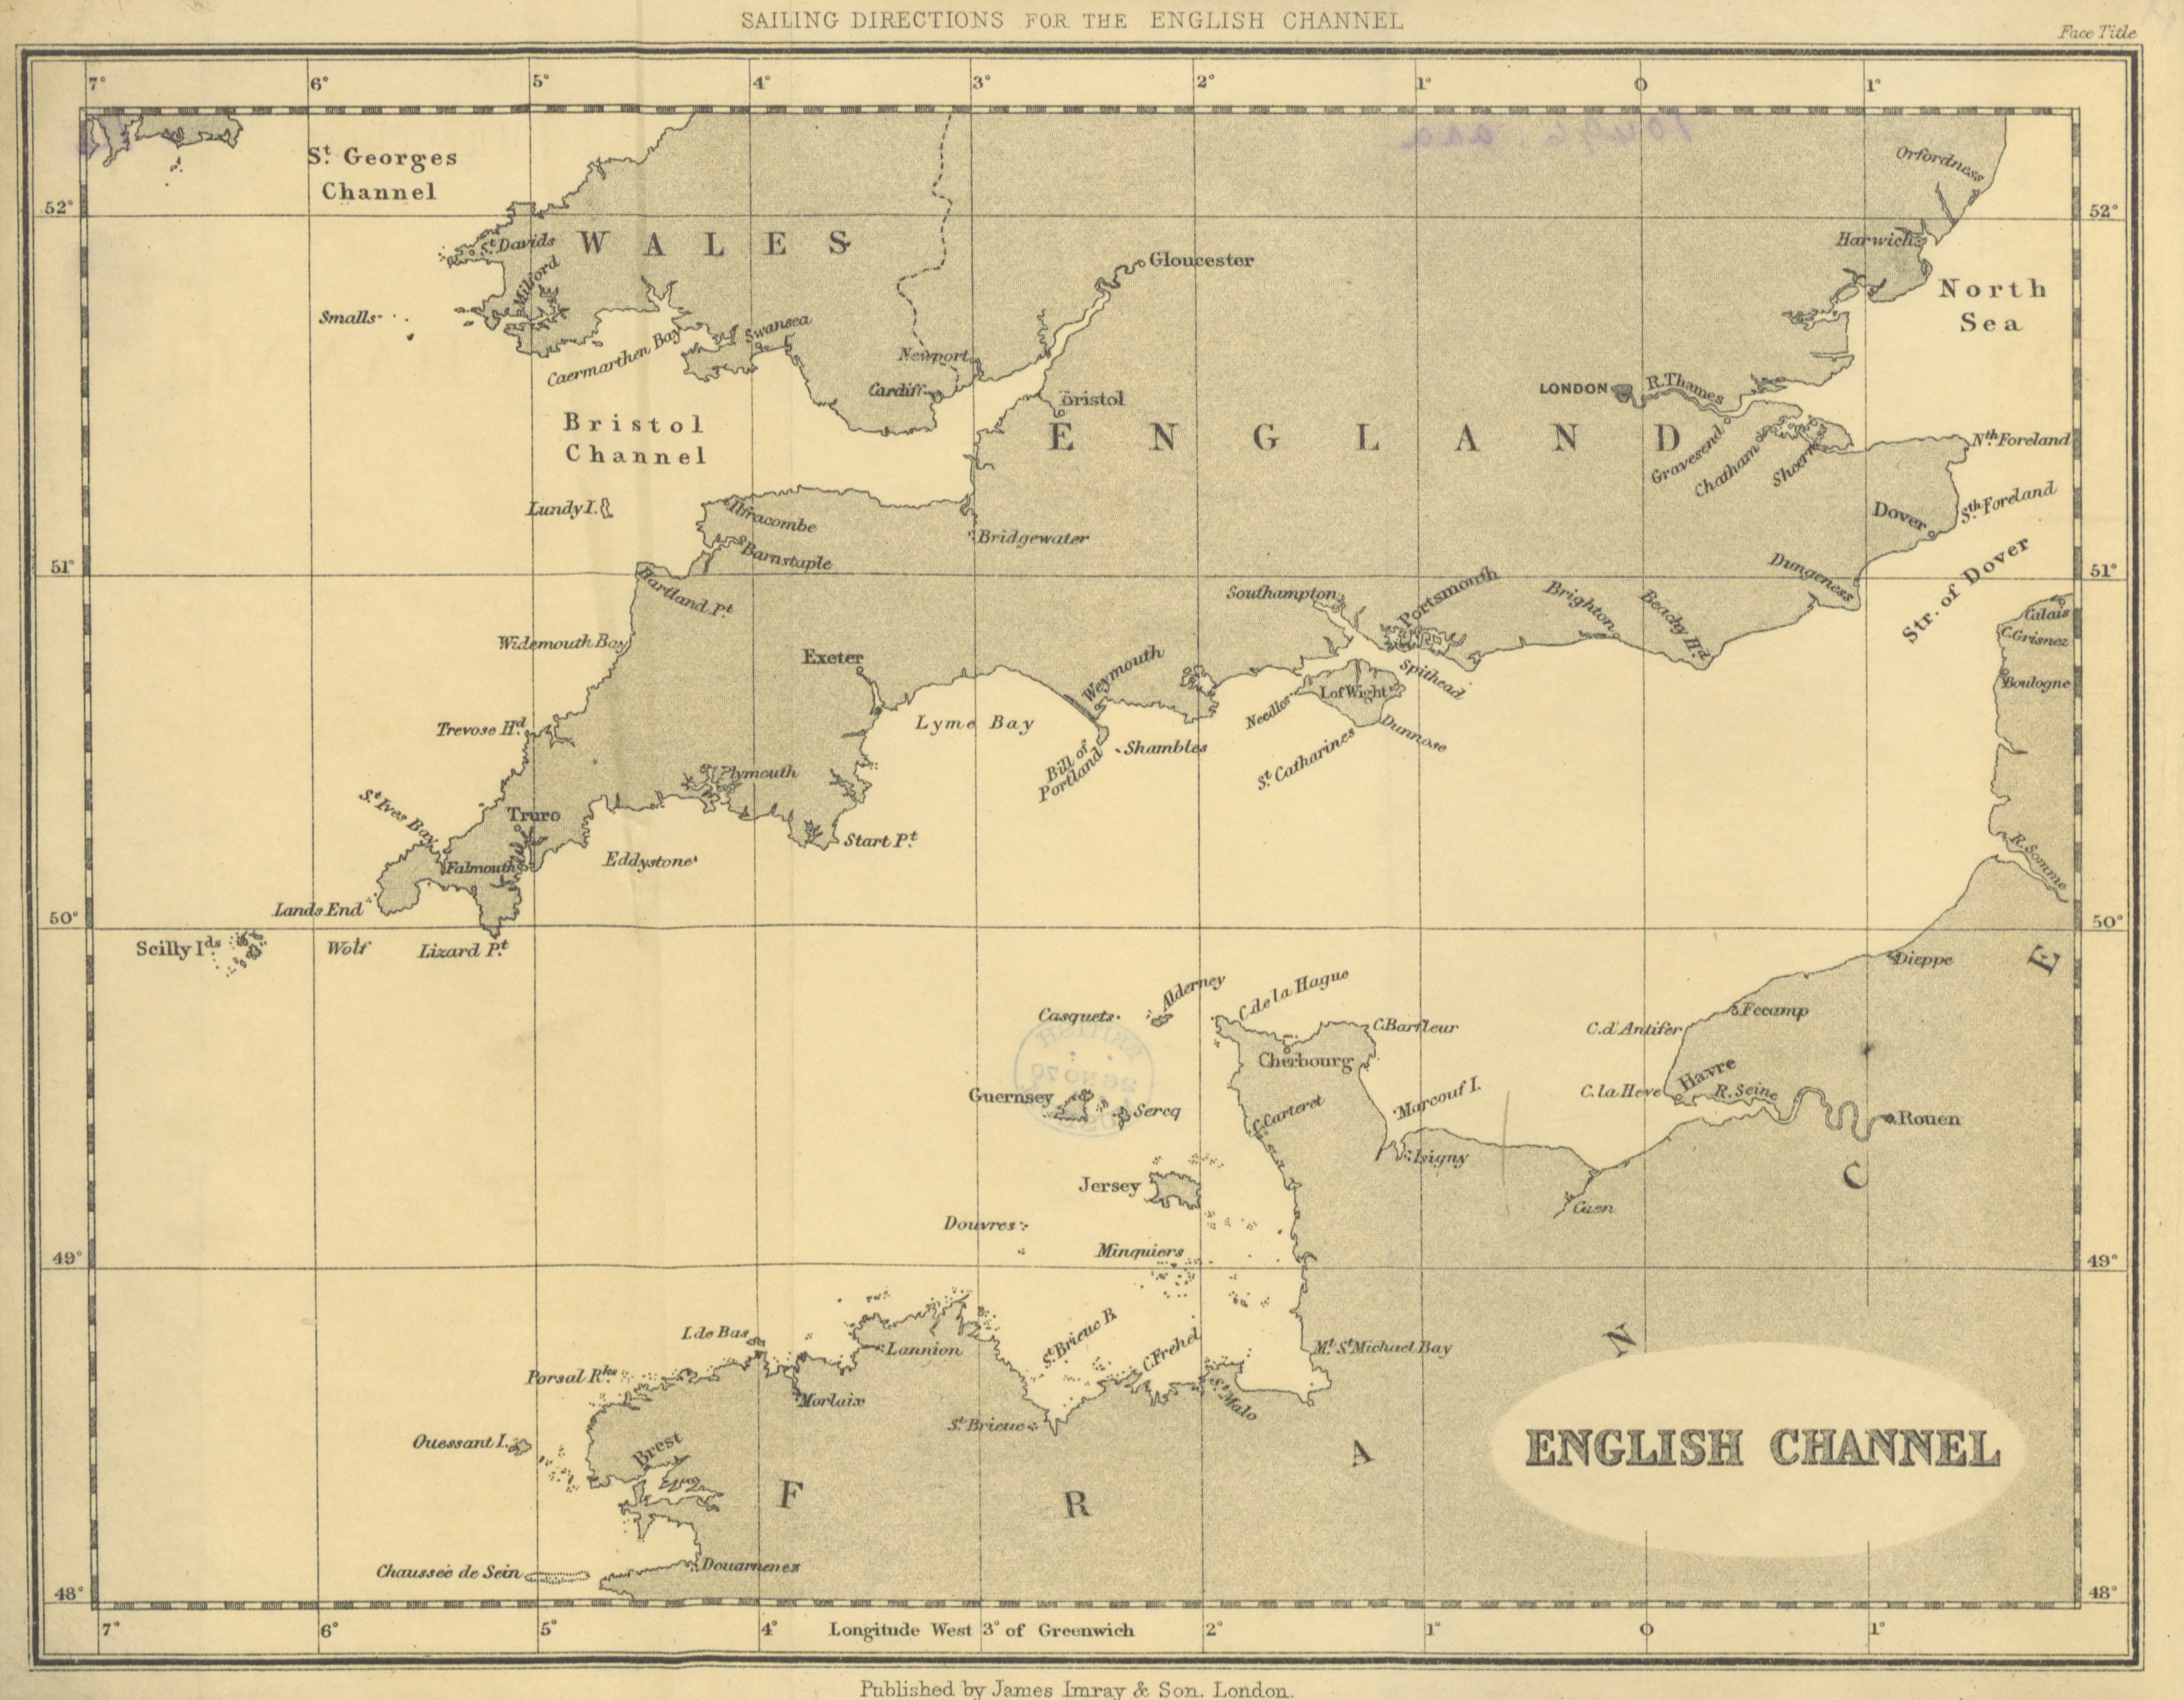 10 of 'Sailing Directions for the English Channel' (11092446386)